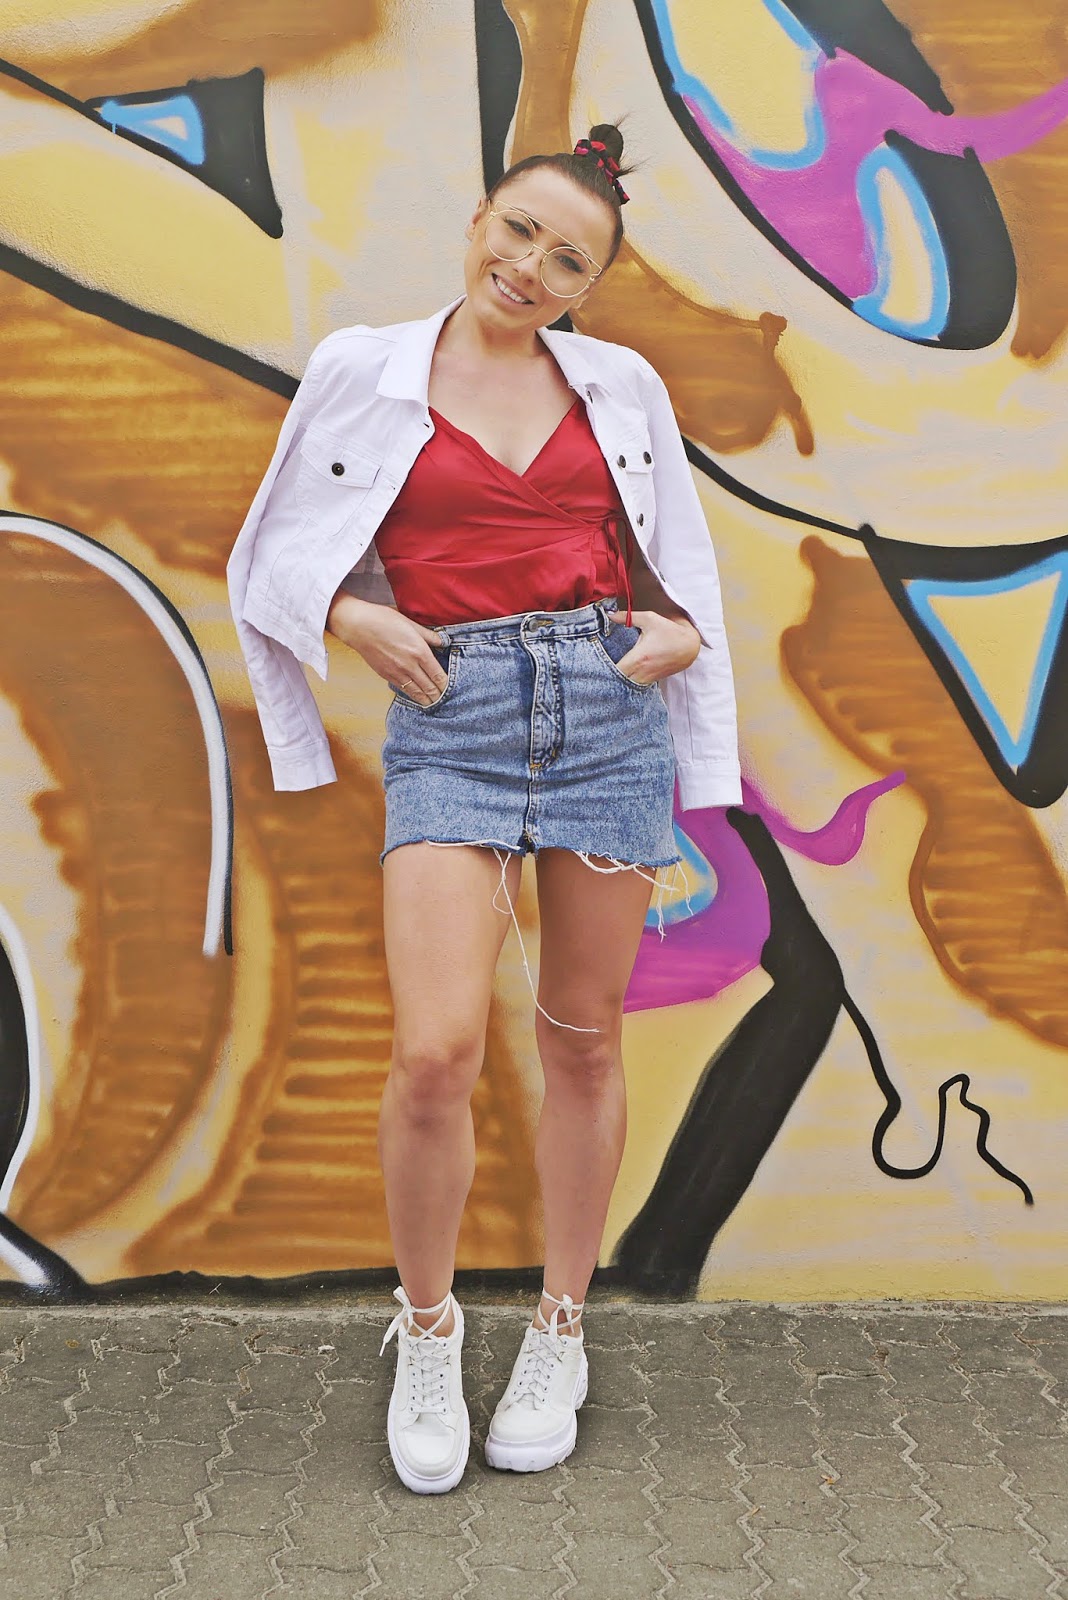 denim white jacket ugly shoes red top blue skirt look outfit karyn fashion bloger